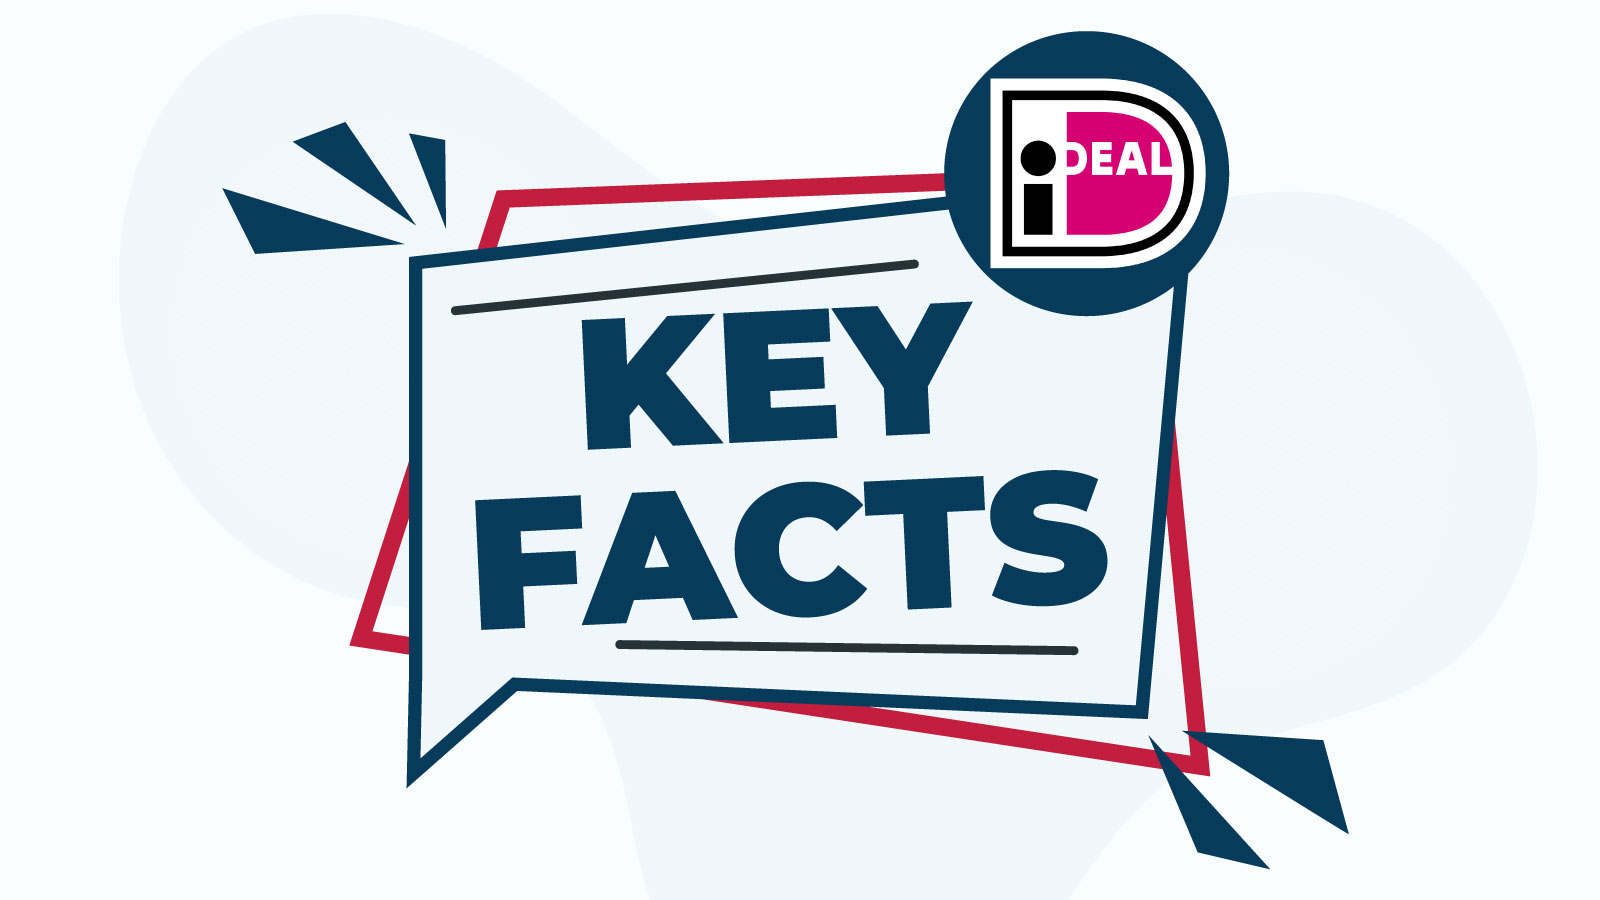 iDeal payment key facts